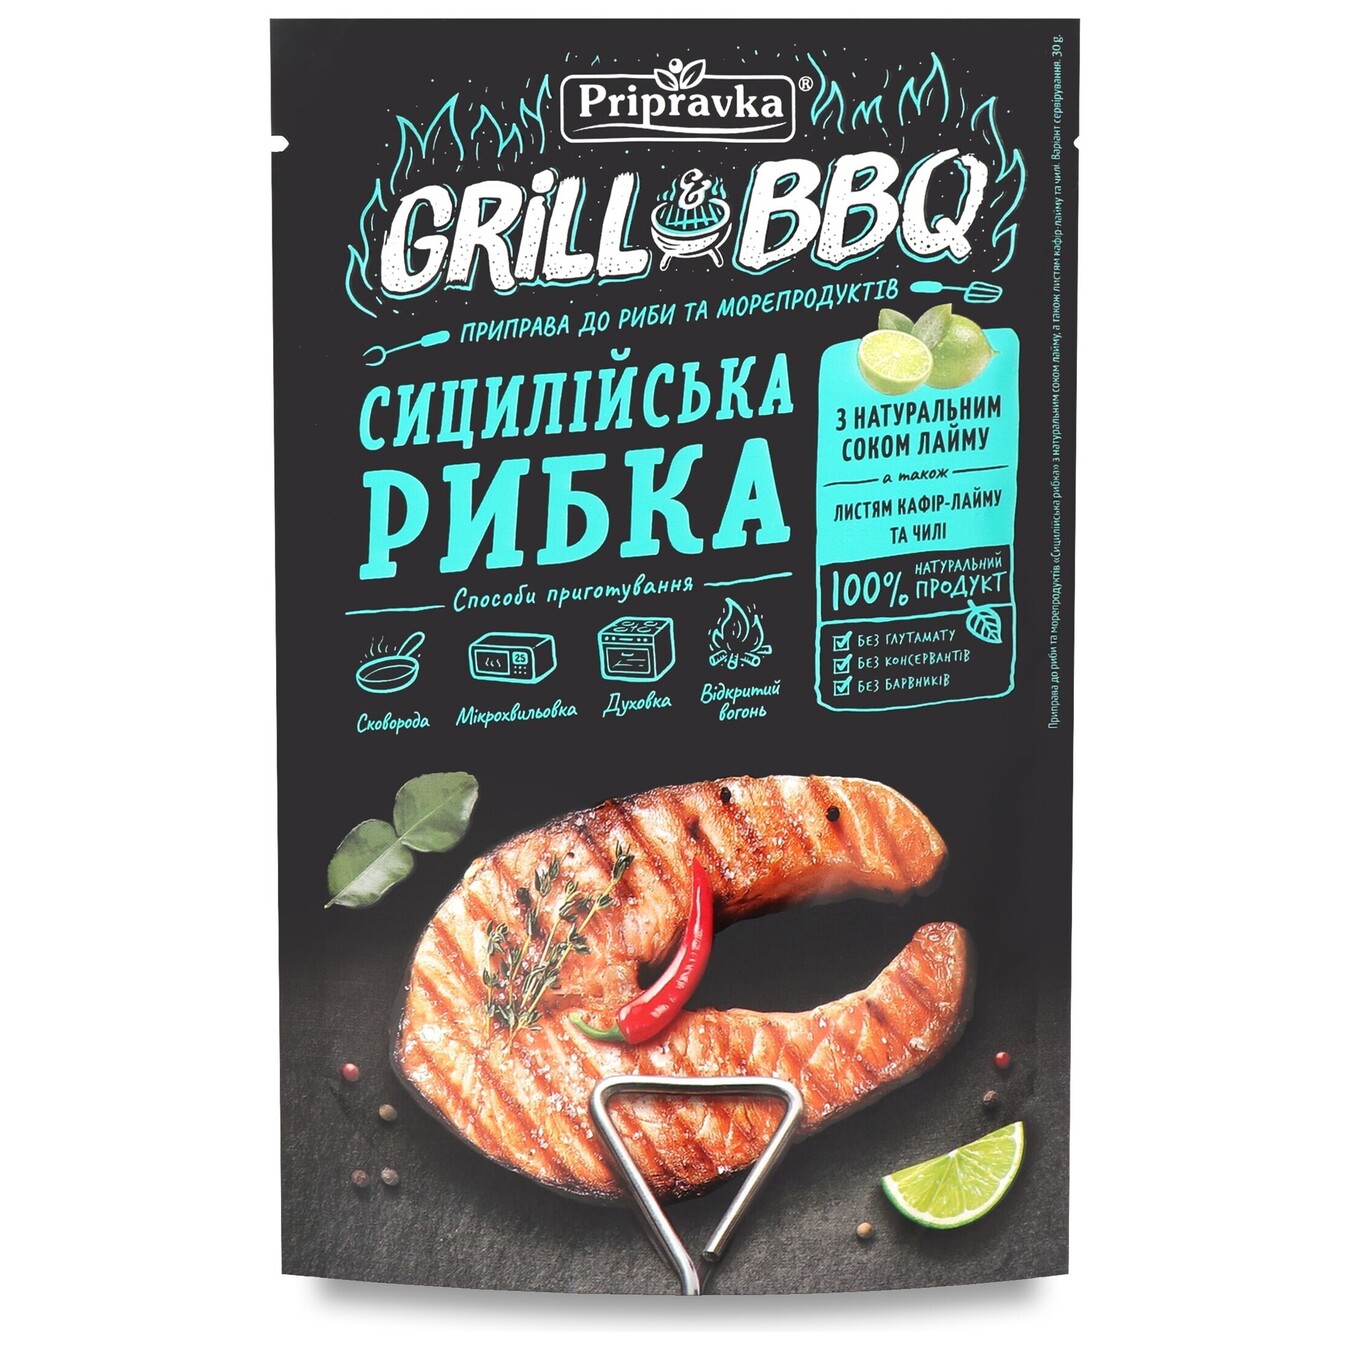 Pripravka Grill & BBQ seasoning for fish and seafood Sicilian fish with natural lime juice, kafir-lime leaves and chili 30g